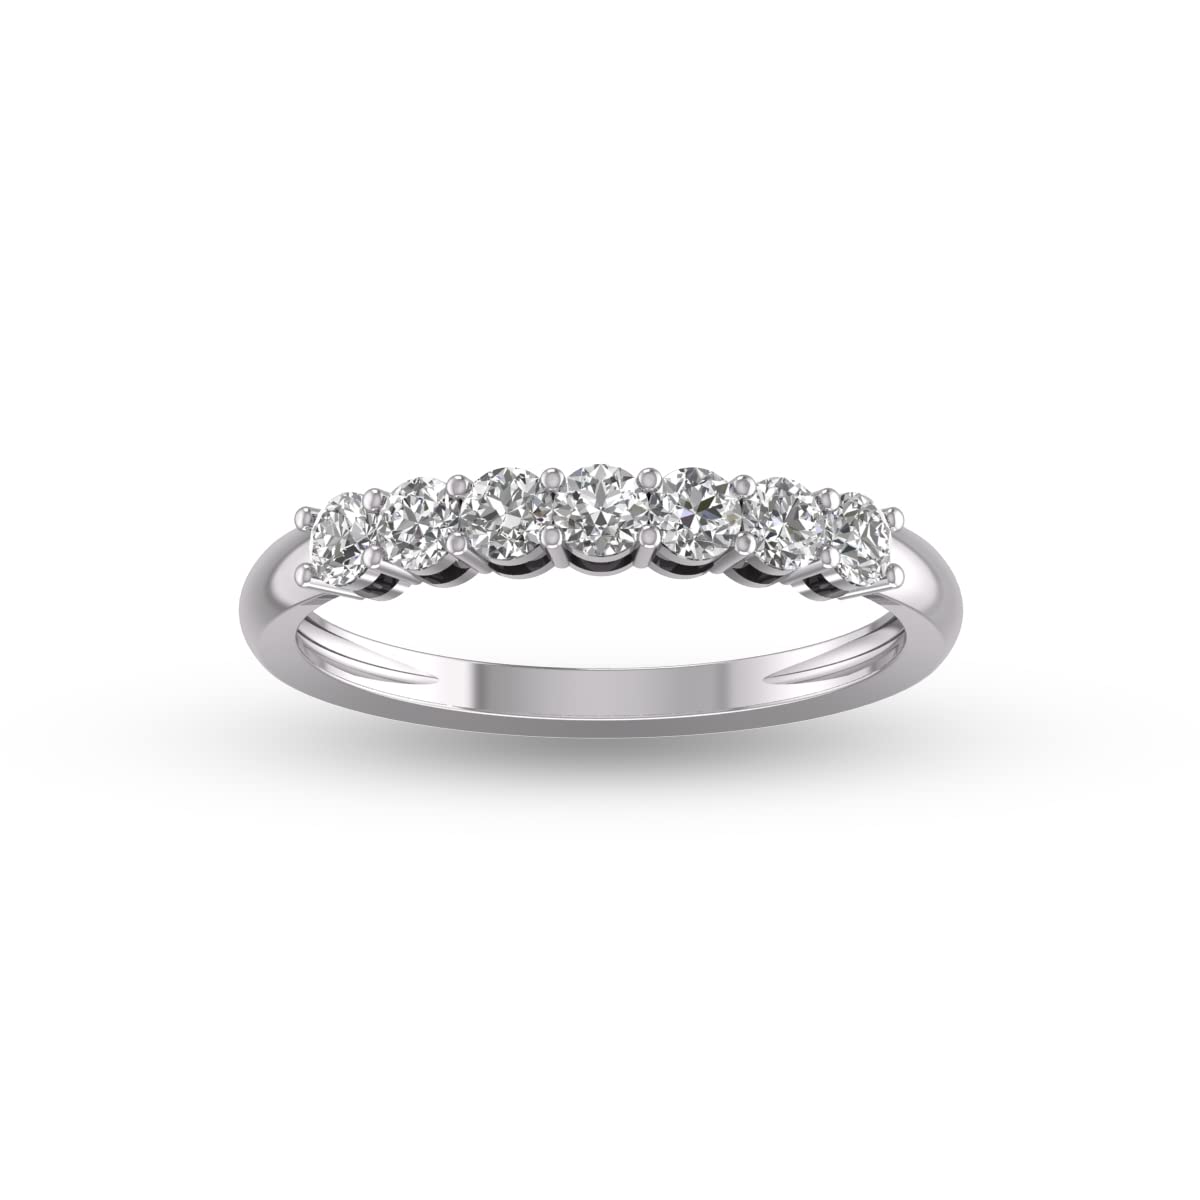 1/2 Carat TW Seven Stone Natural Round Diamond Wedding Anniversary Band In 14k White Gold (J-K Color I2-I3 Clarity)